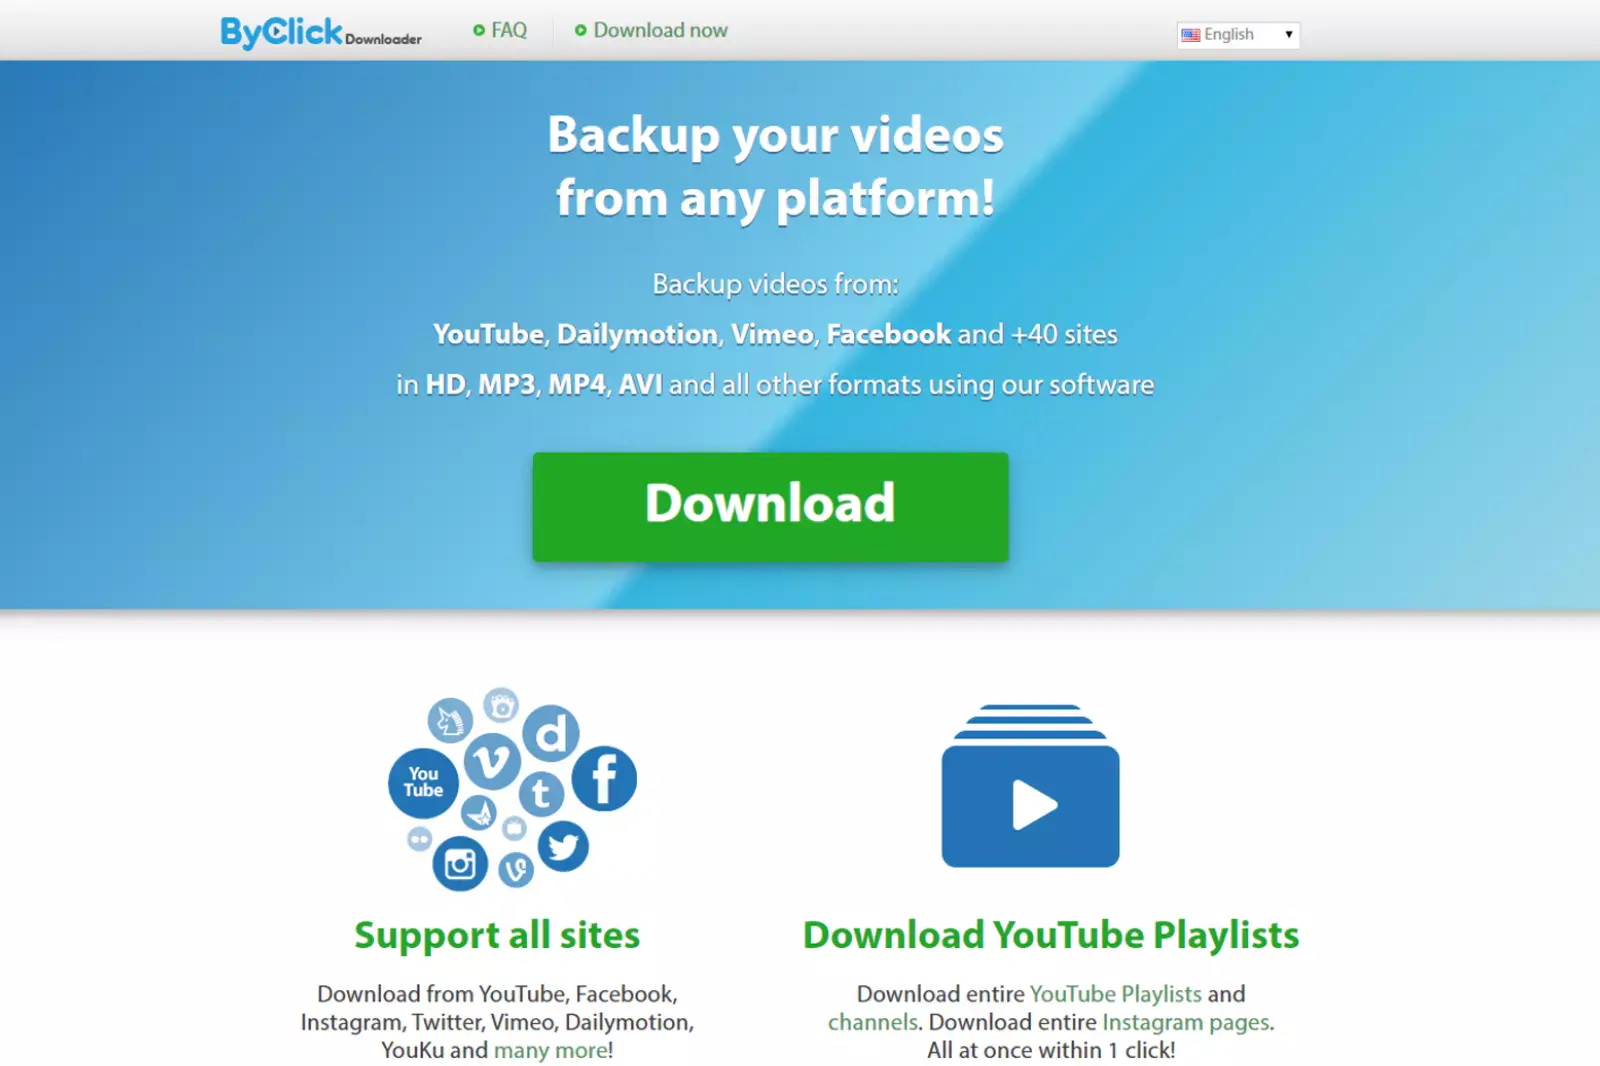 Home Page of By Click Downloader